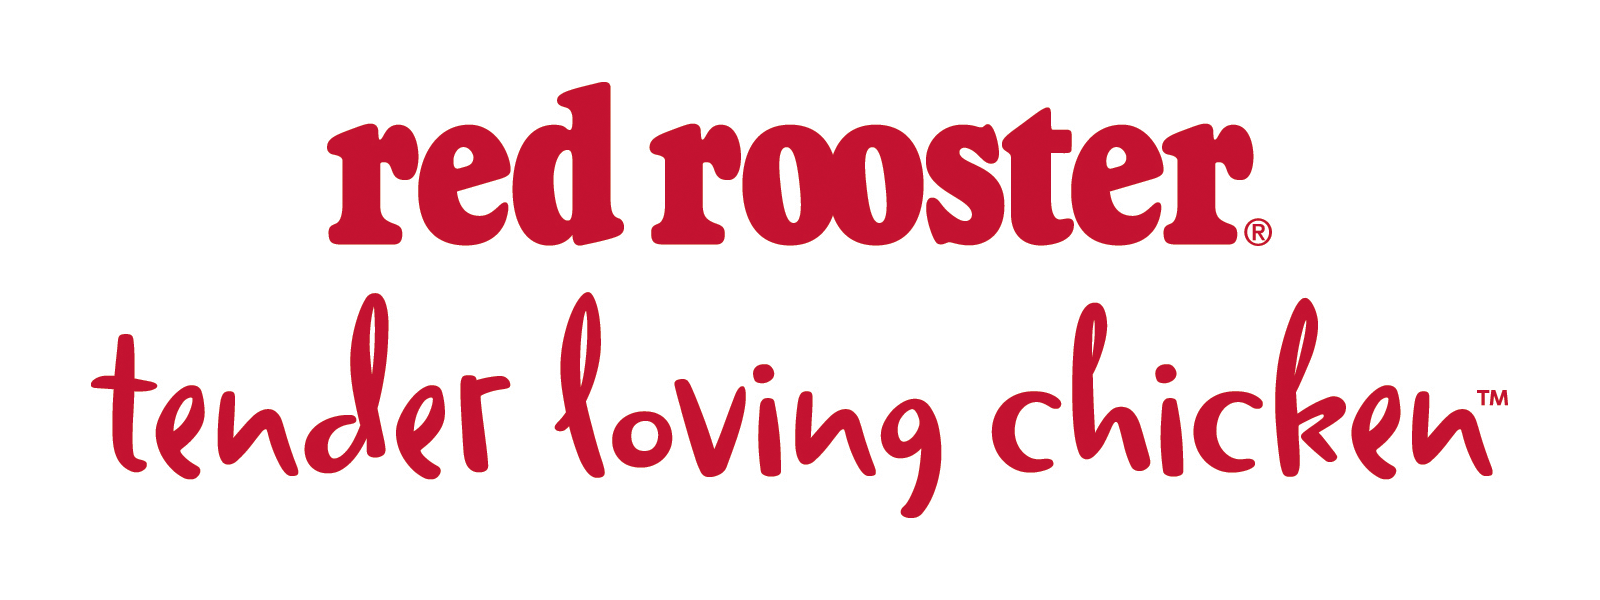 Red Rooster Logo - Red Rooster